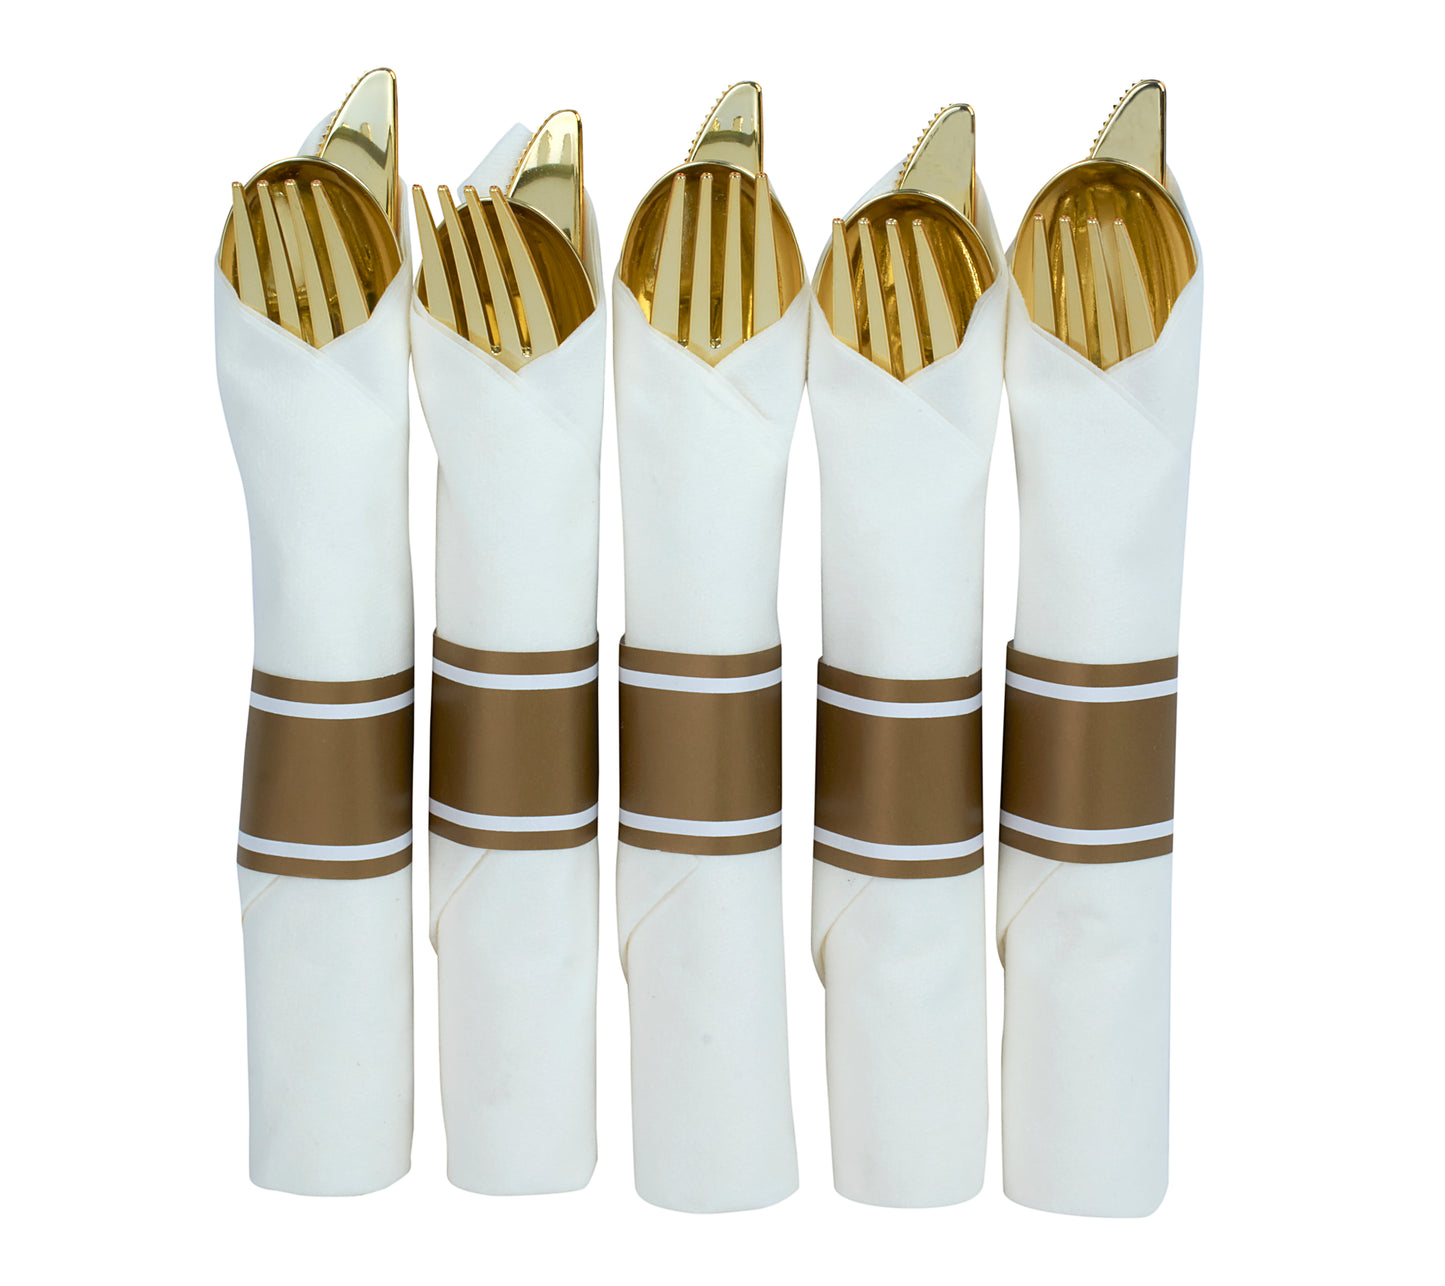 200 piece pre-rolled gold plastic silverware set for 50 guests, each napkin pack includes 1 fork, 1 knife, and 1 spoon wrapped inside